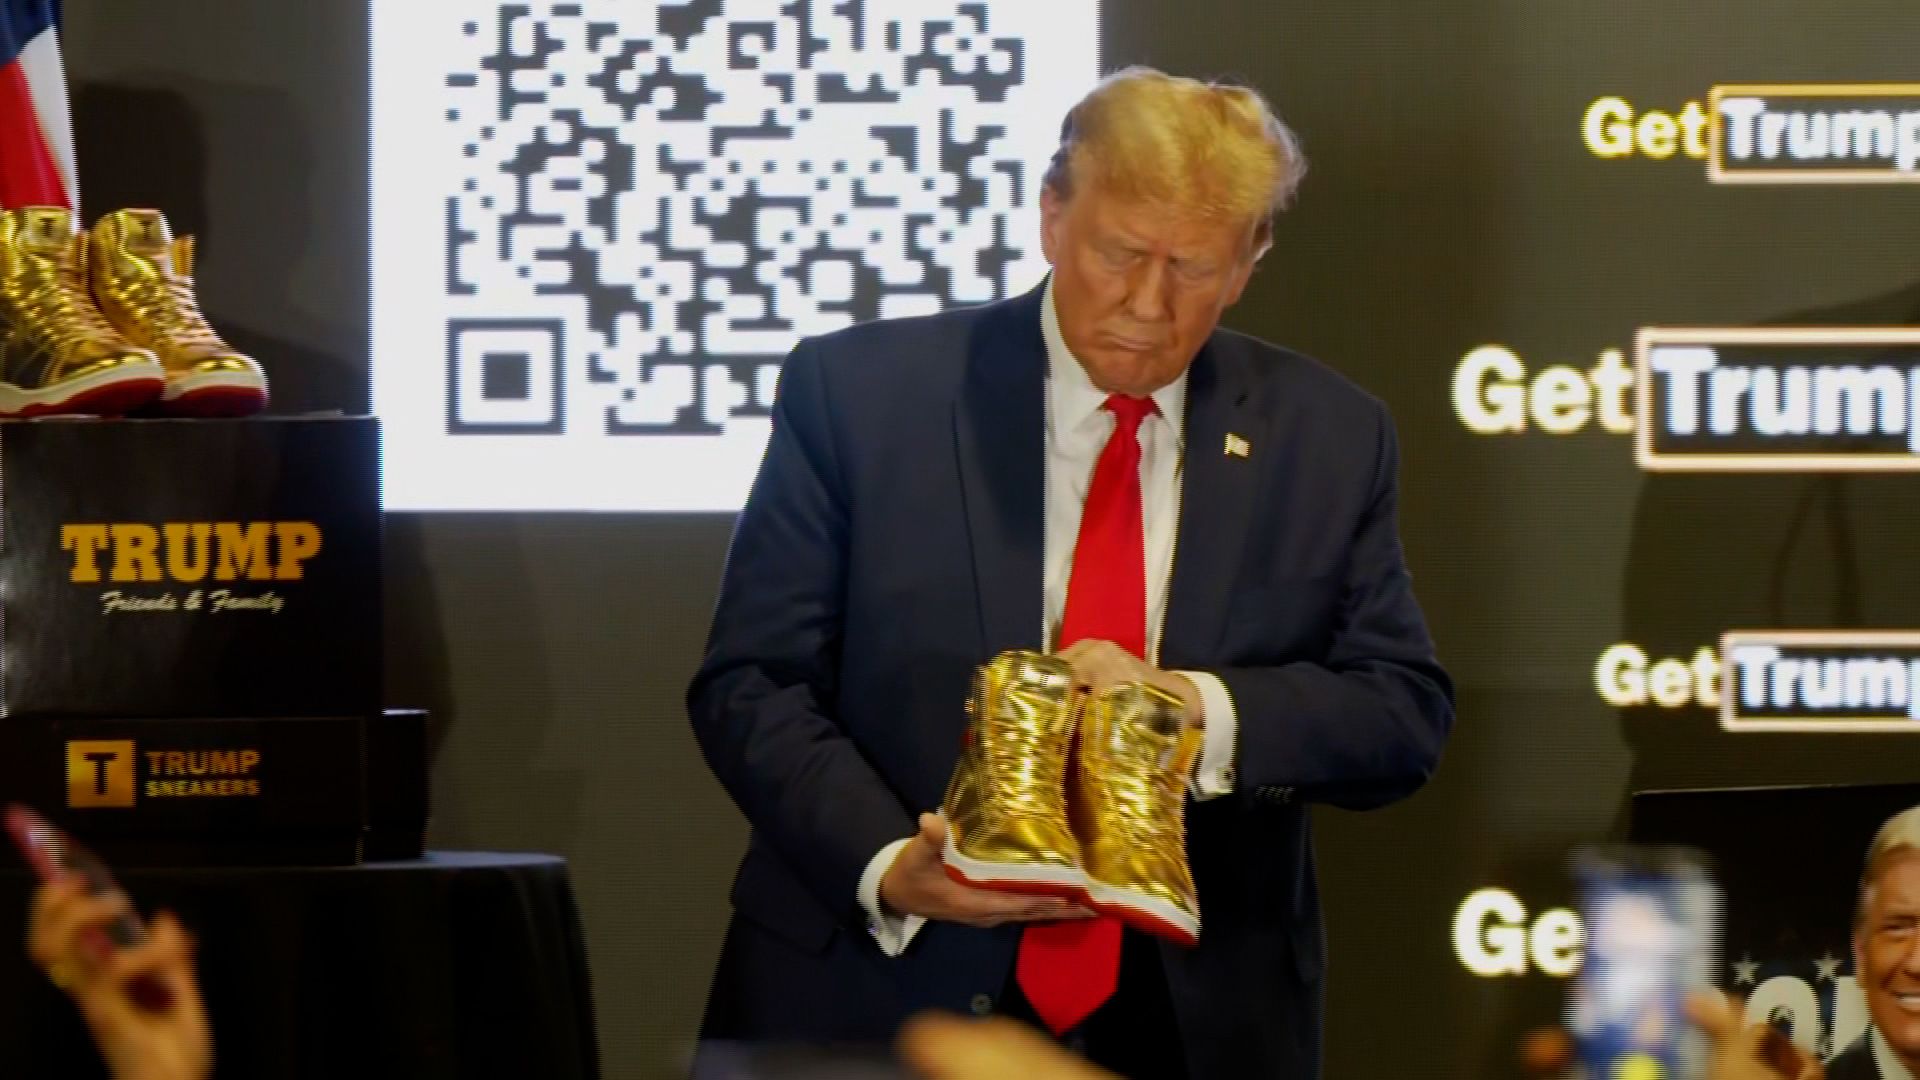 Trump’s $399 Sneakers Sell Out in Hours